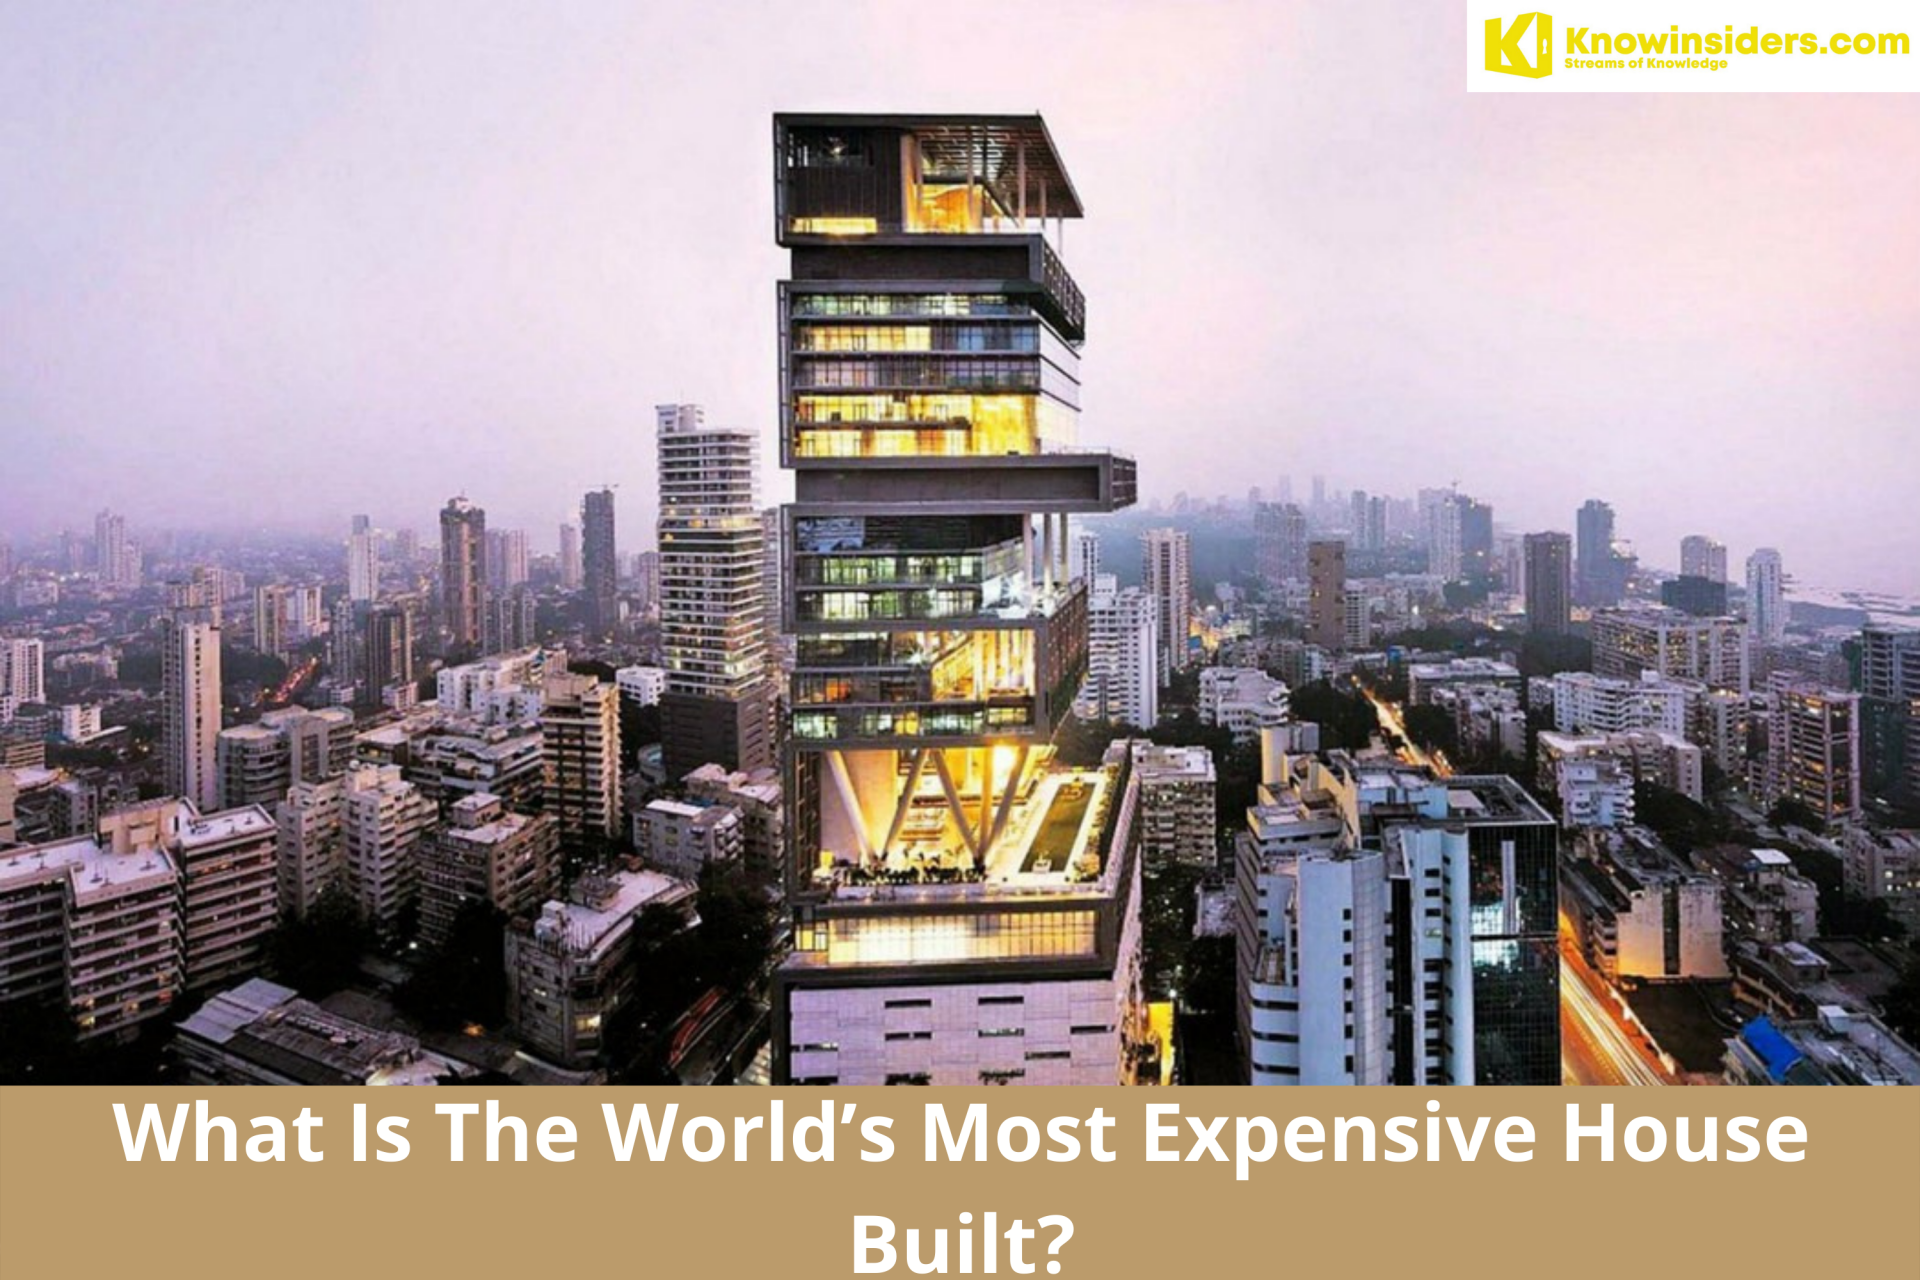 What Is The World’s Most Expensive House Built?